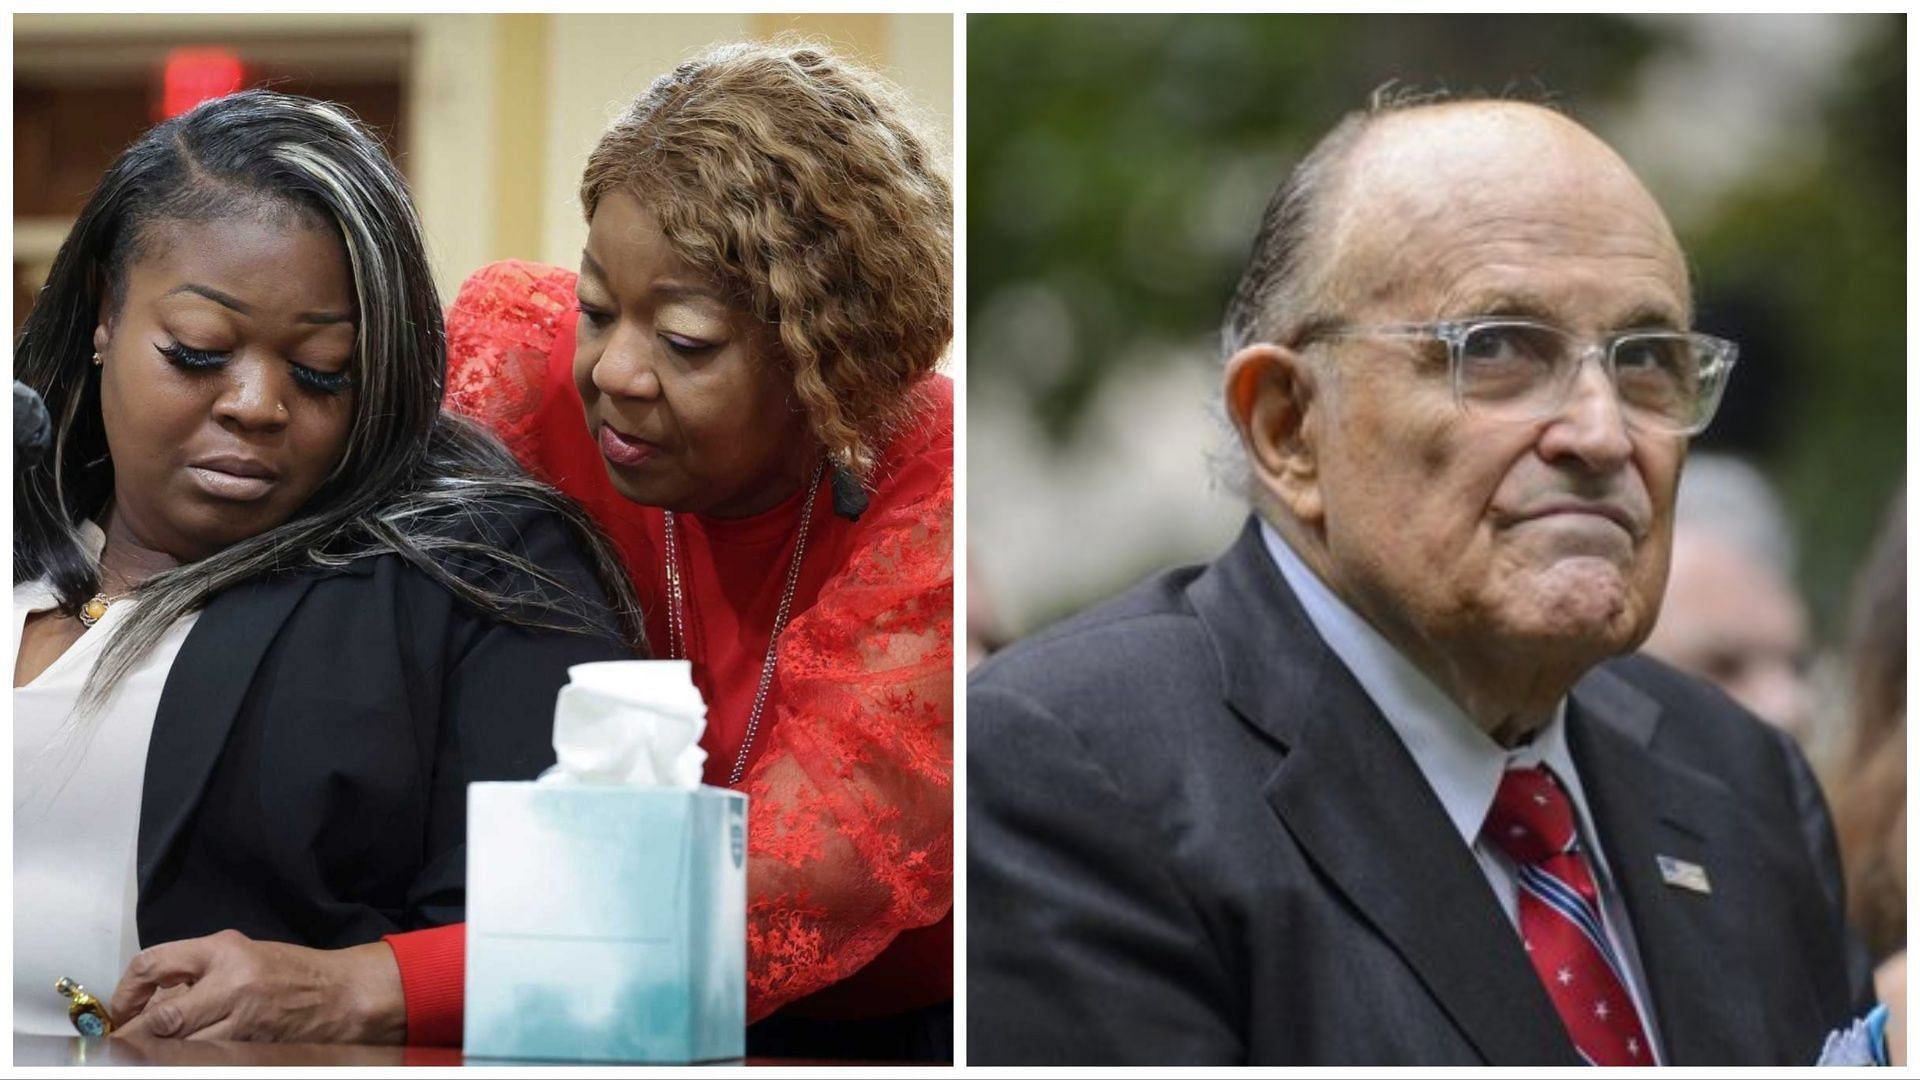 Rudy Giuliani made false accusations against Ruby Freeman and her daughter, (Images via @FrankMikeDavis1/Twitter)